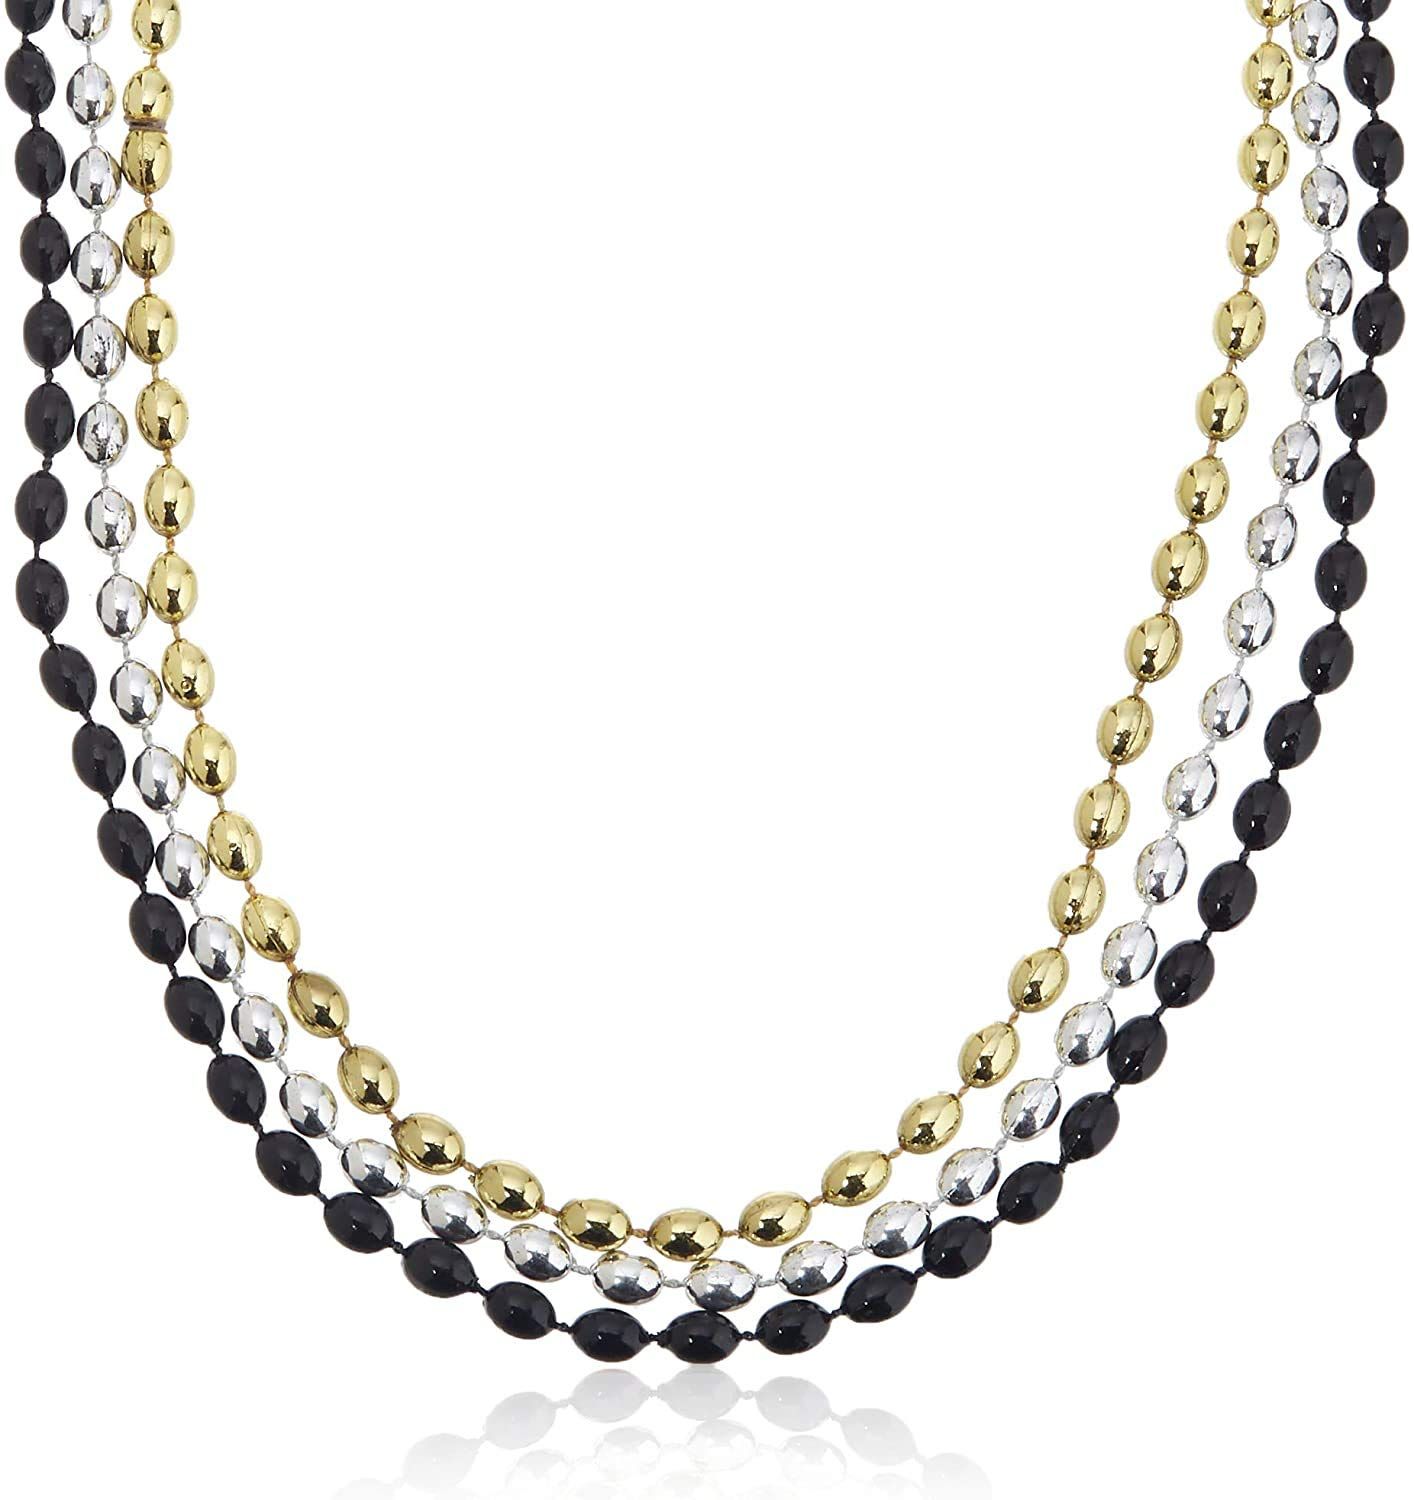 Amscan Bead Necklace, Party Accessory, Black, Silver, Gold | Amazon (US)